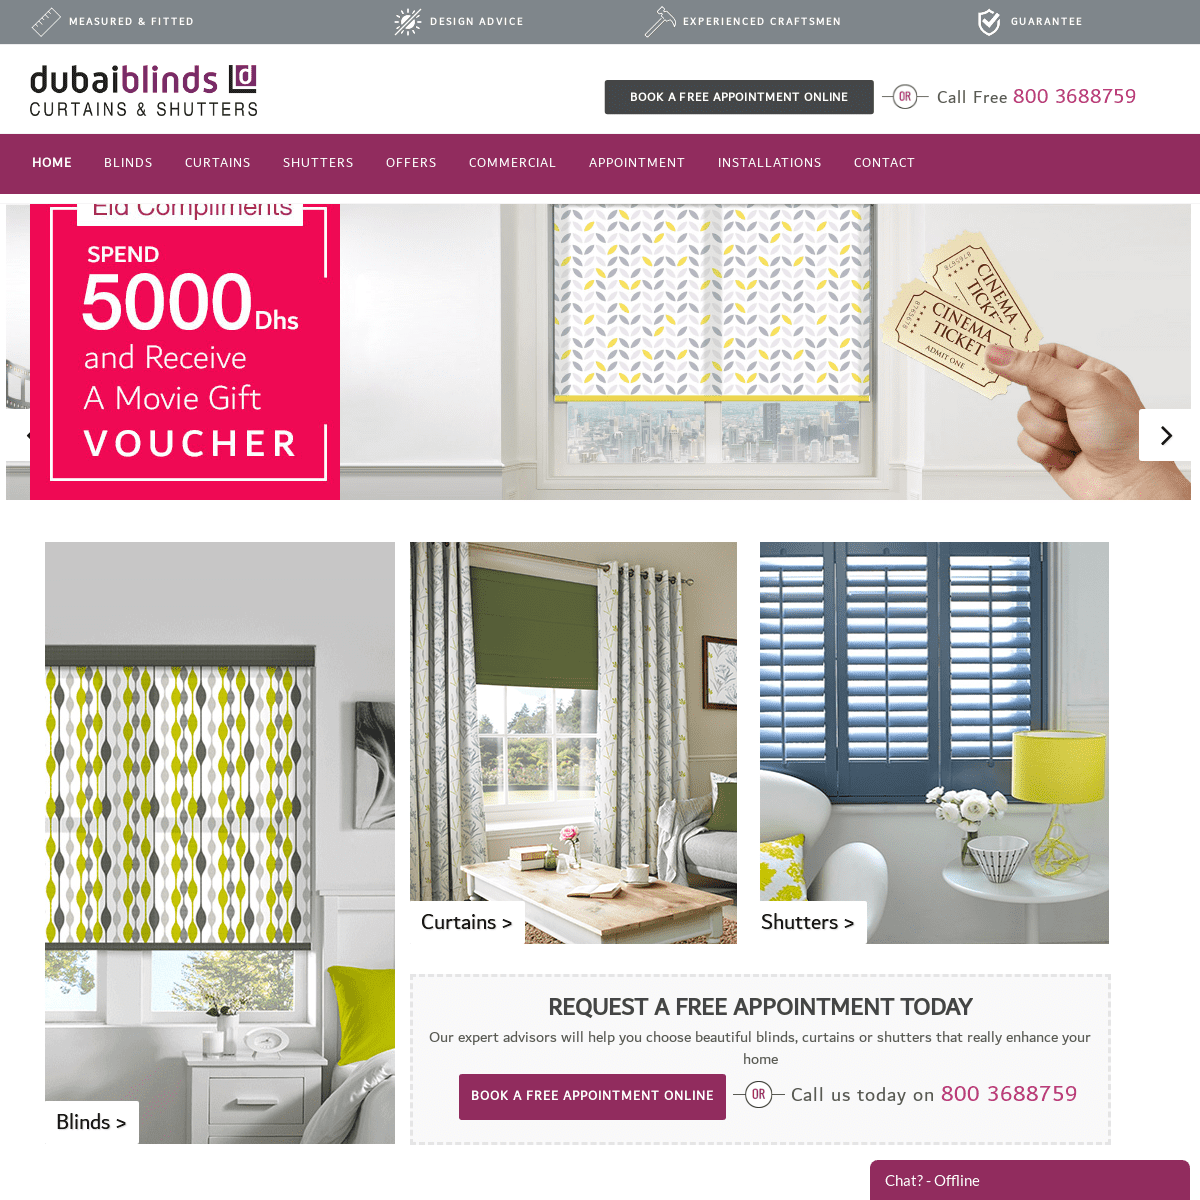 Choose blinds & curtains at Home | Up to 50% off